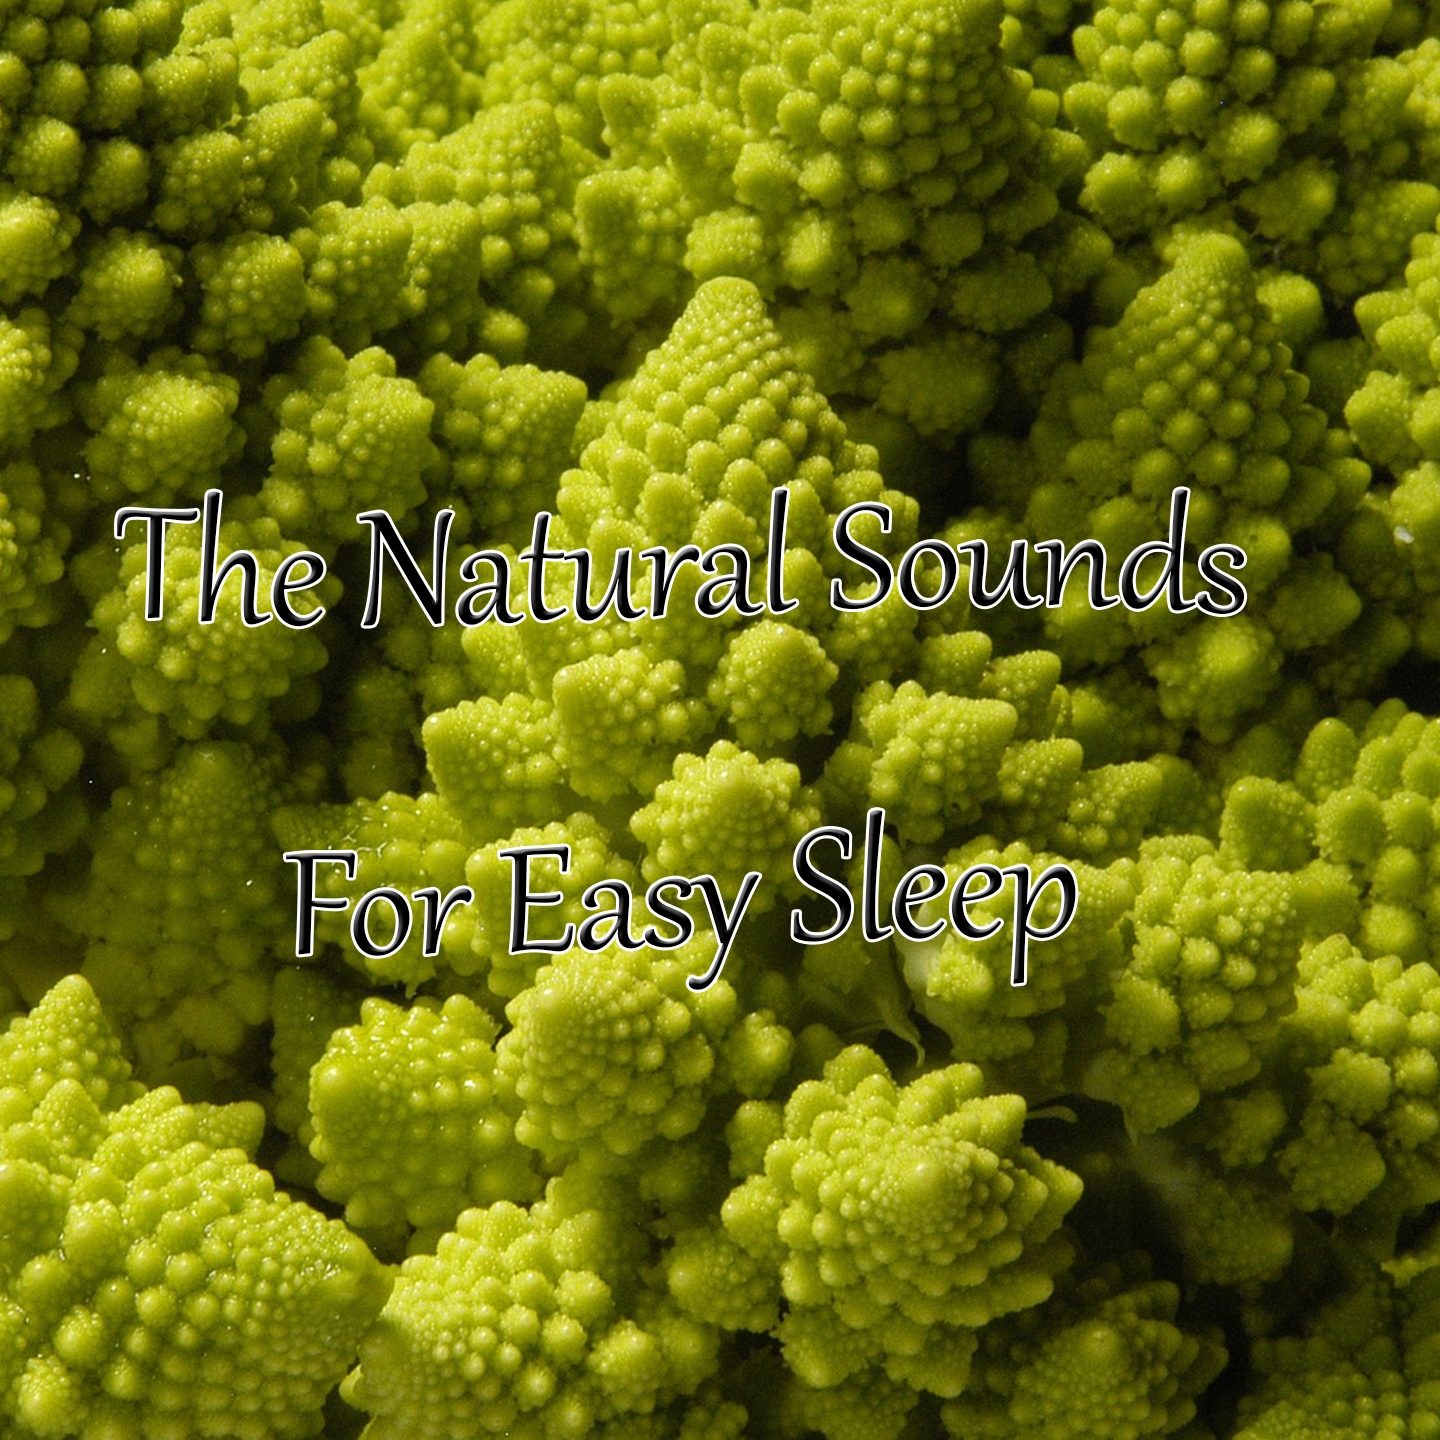 The Natural Sounds For Easy Sleep